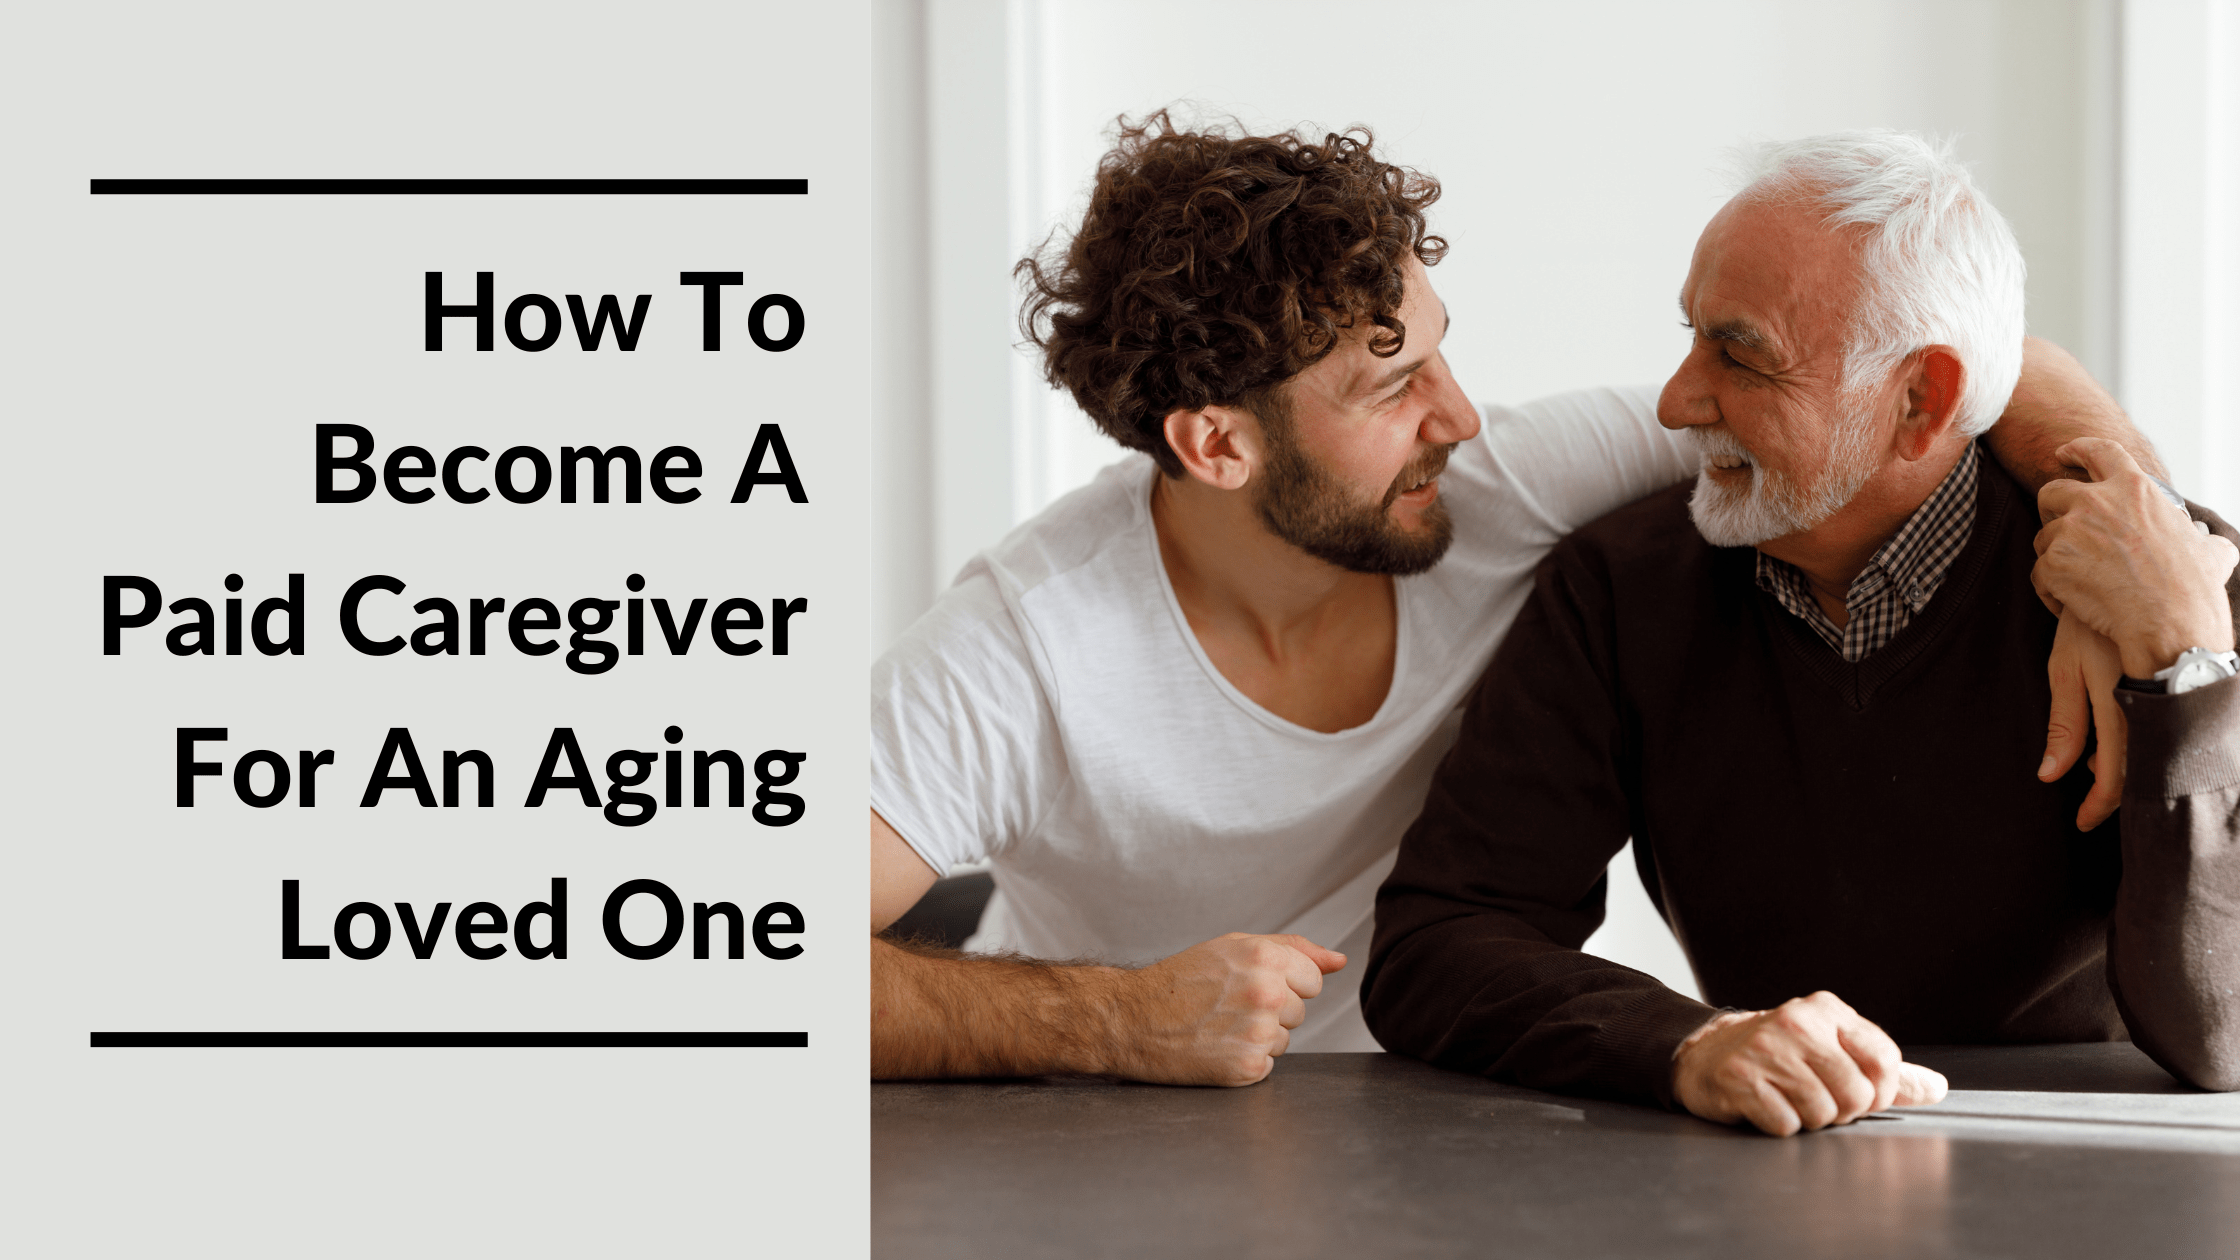 How To Become A Paid Caregiver For My Mother At Home Featured Image